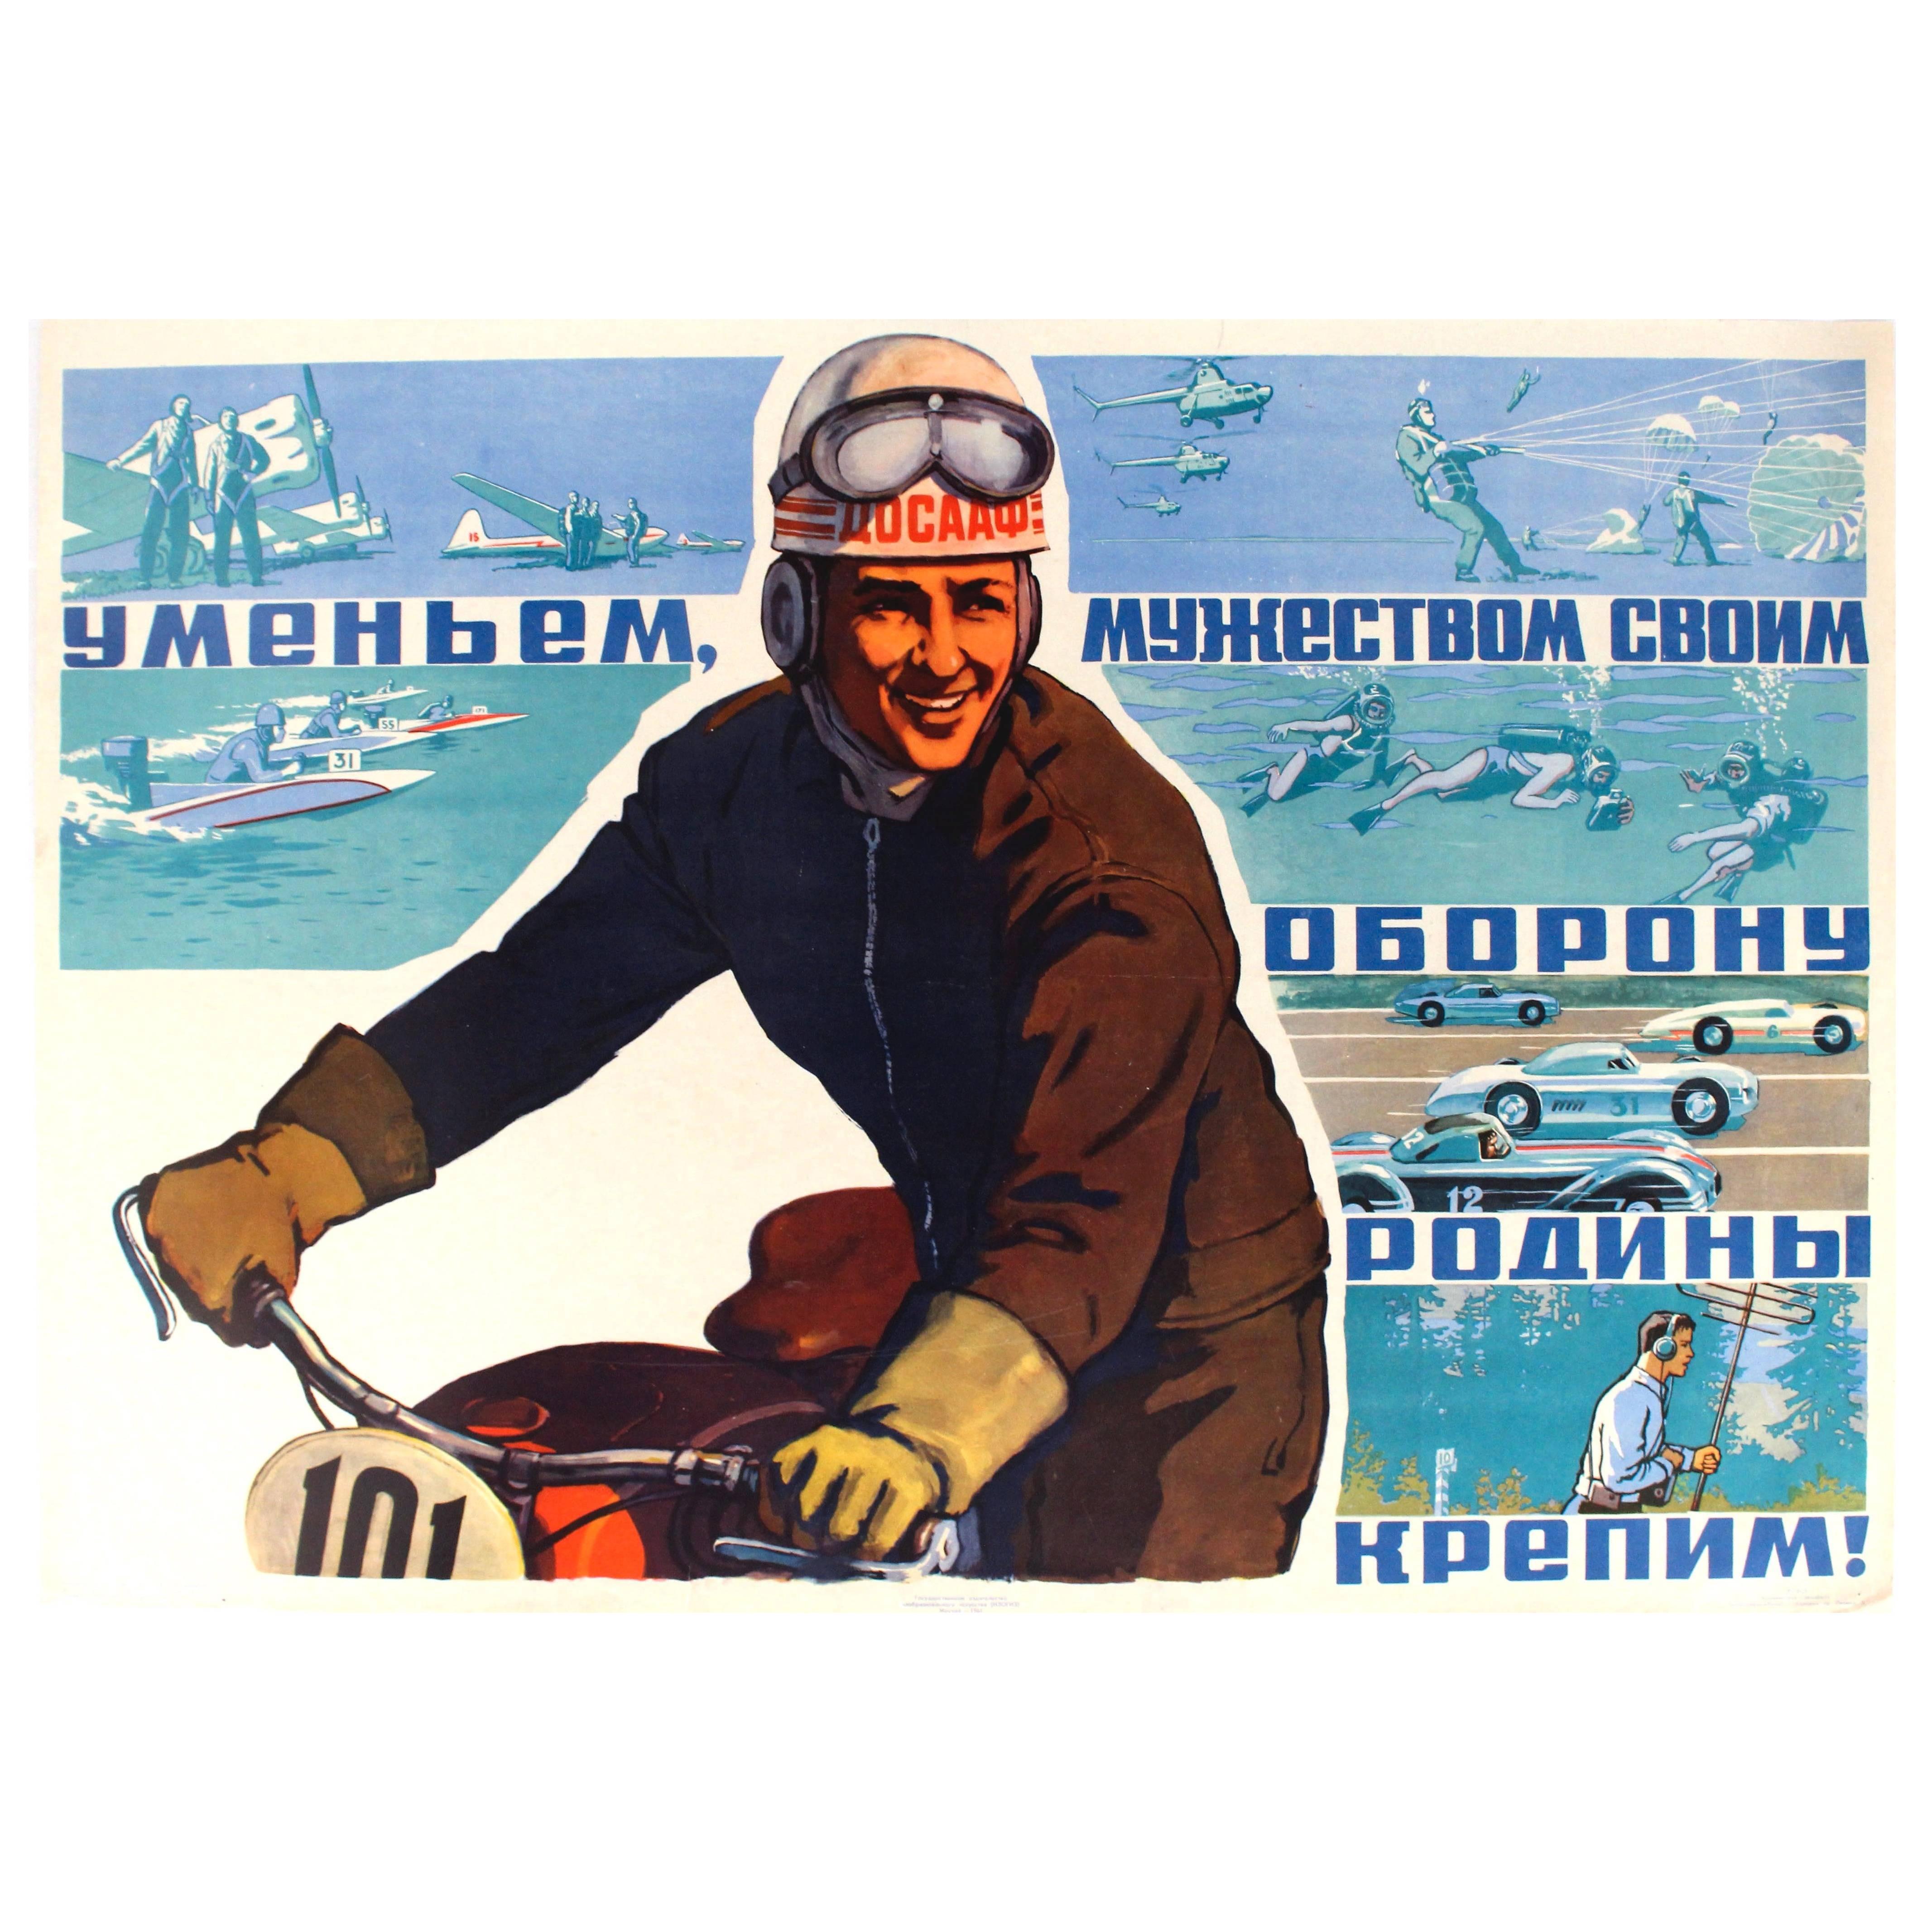 Original Vintage Soviet Sports Poster Featuring Car Racing, Parachute Jumping For Sale